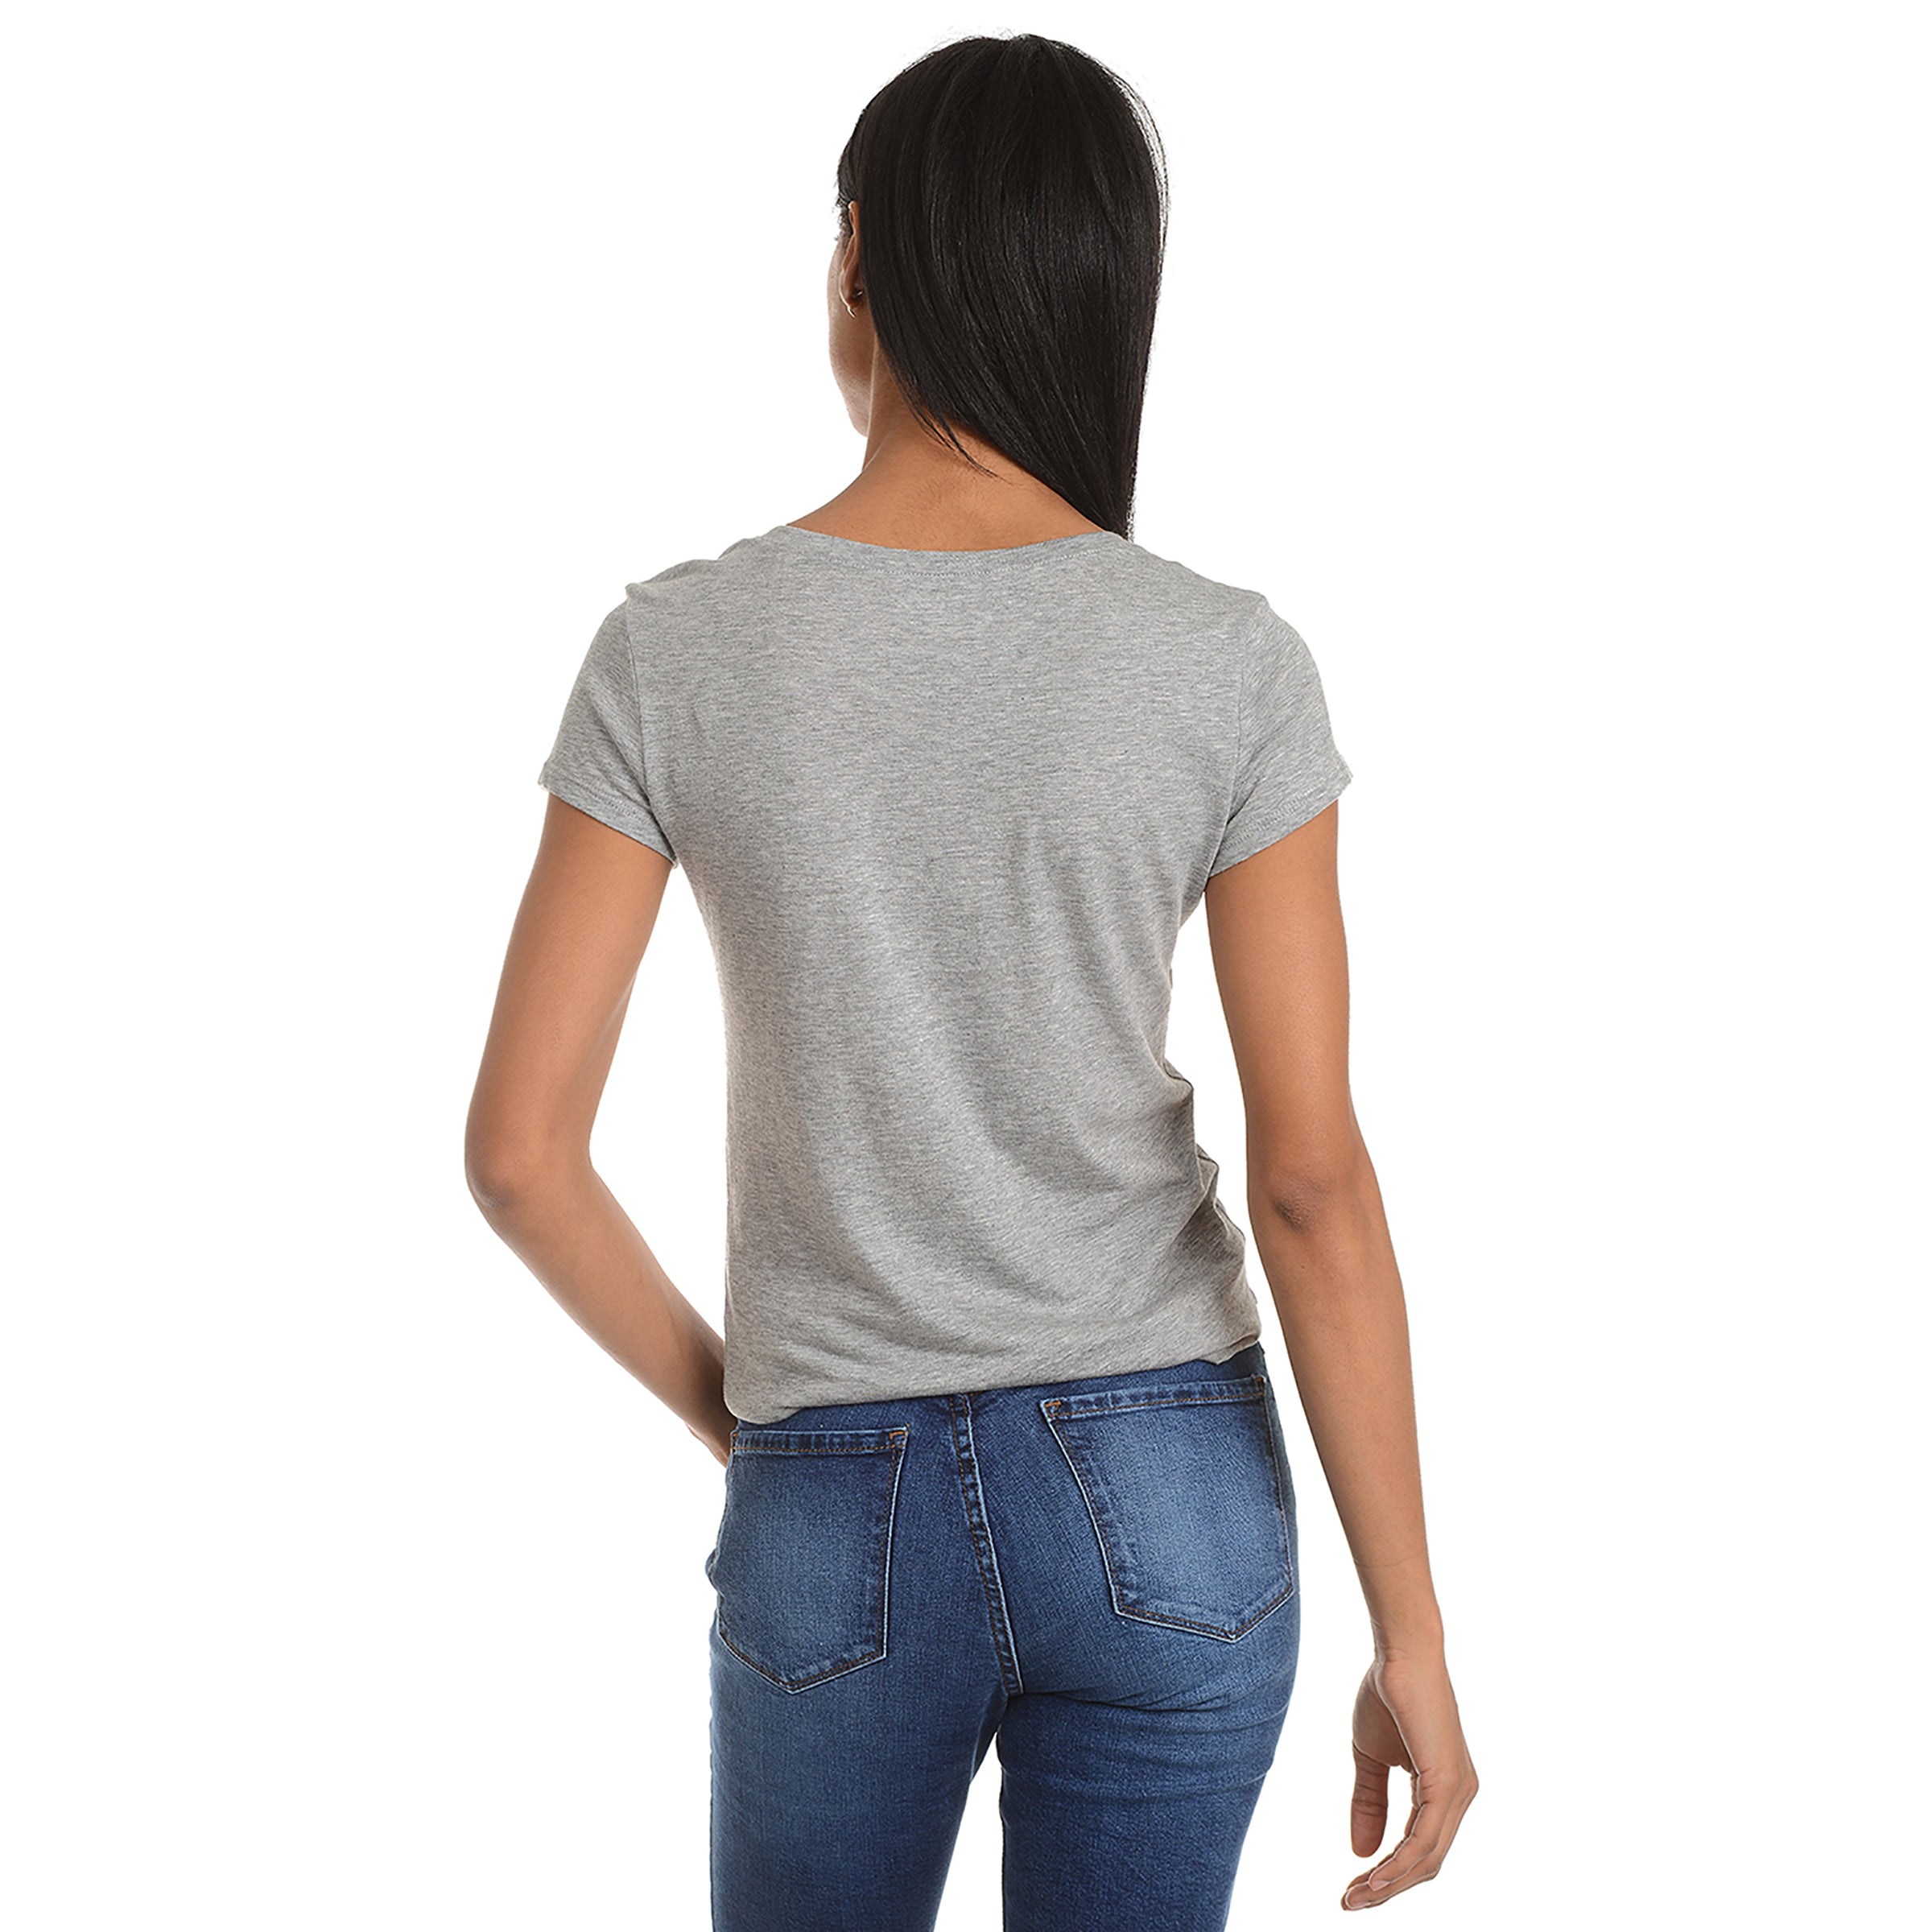 Women wearing Heather Gray Fitted V-Neck Marcy Tee